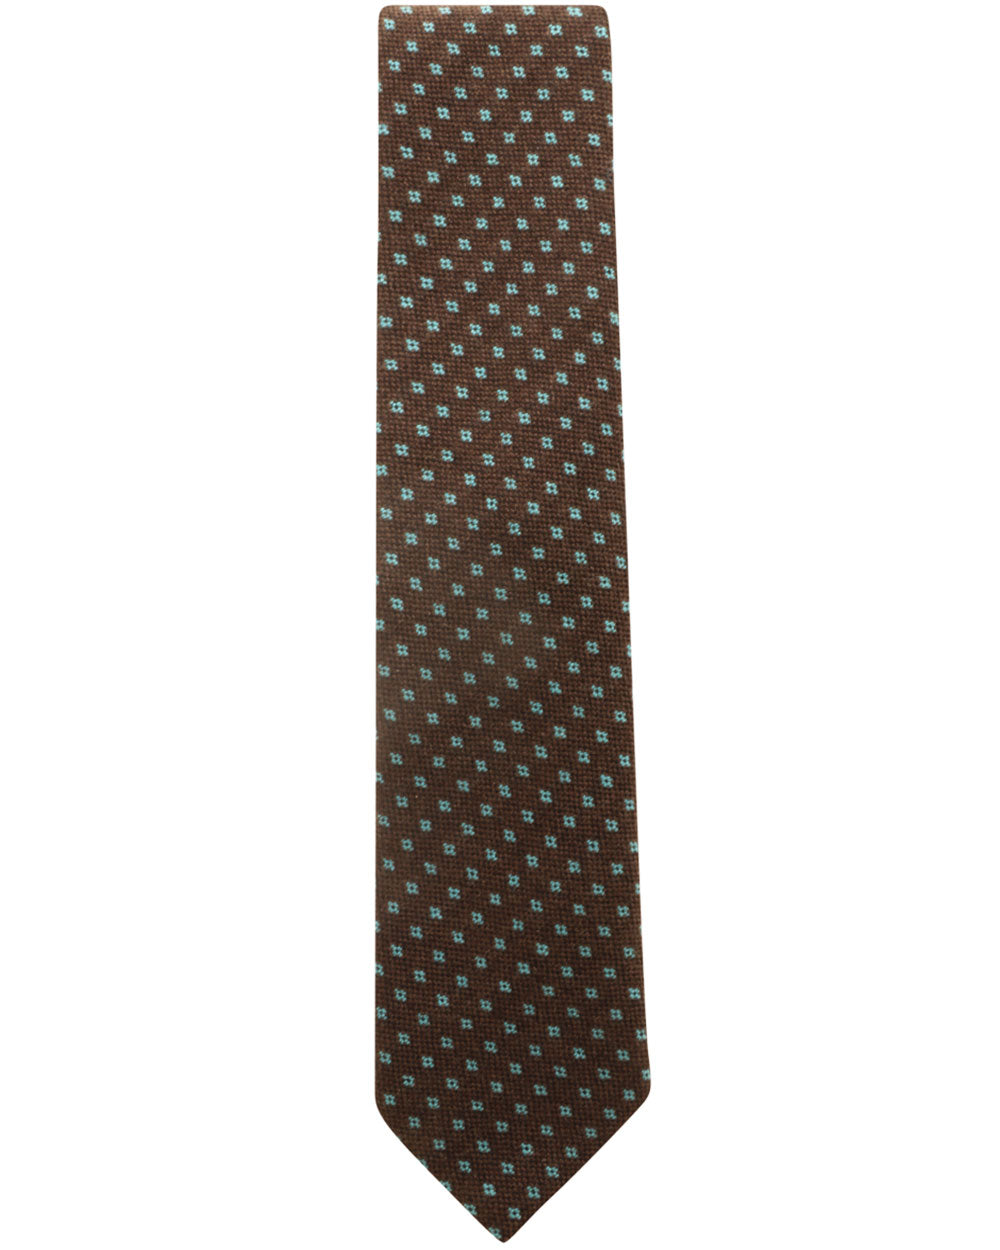 Brown and Turquoise Cashmere Tie